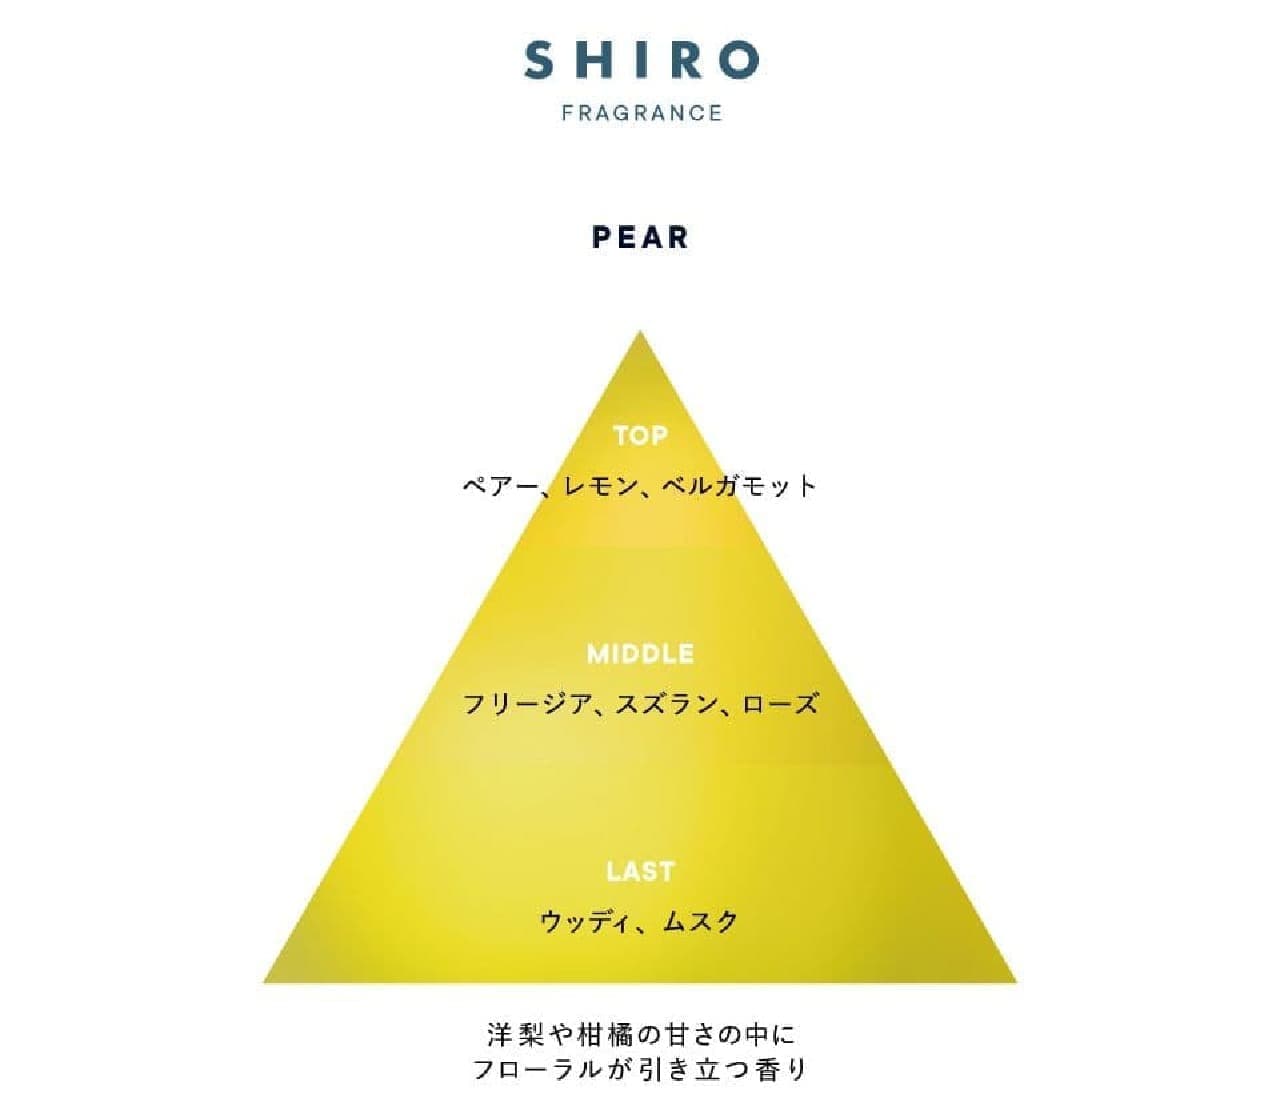 SHIRO Limited Fragrance "Pear" Series